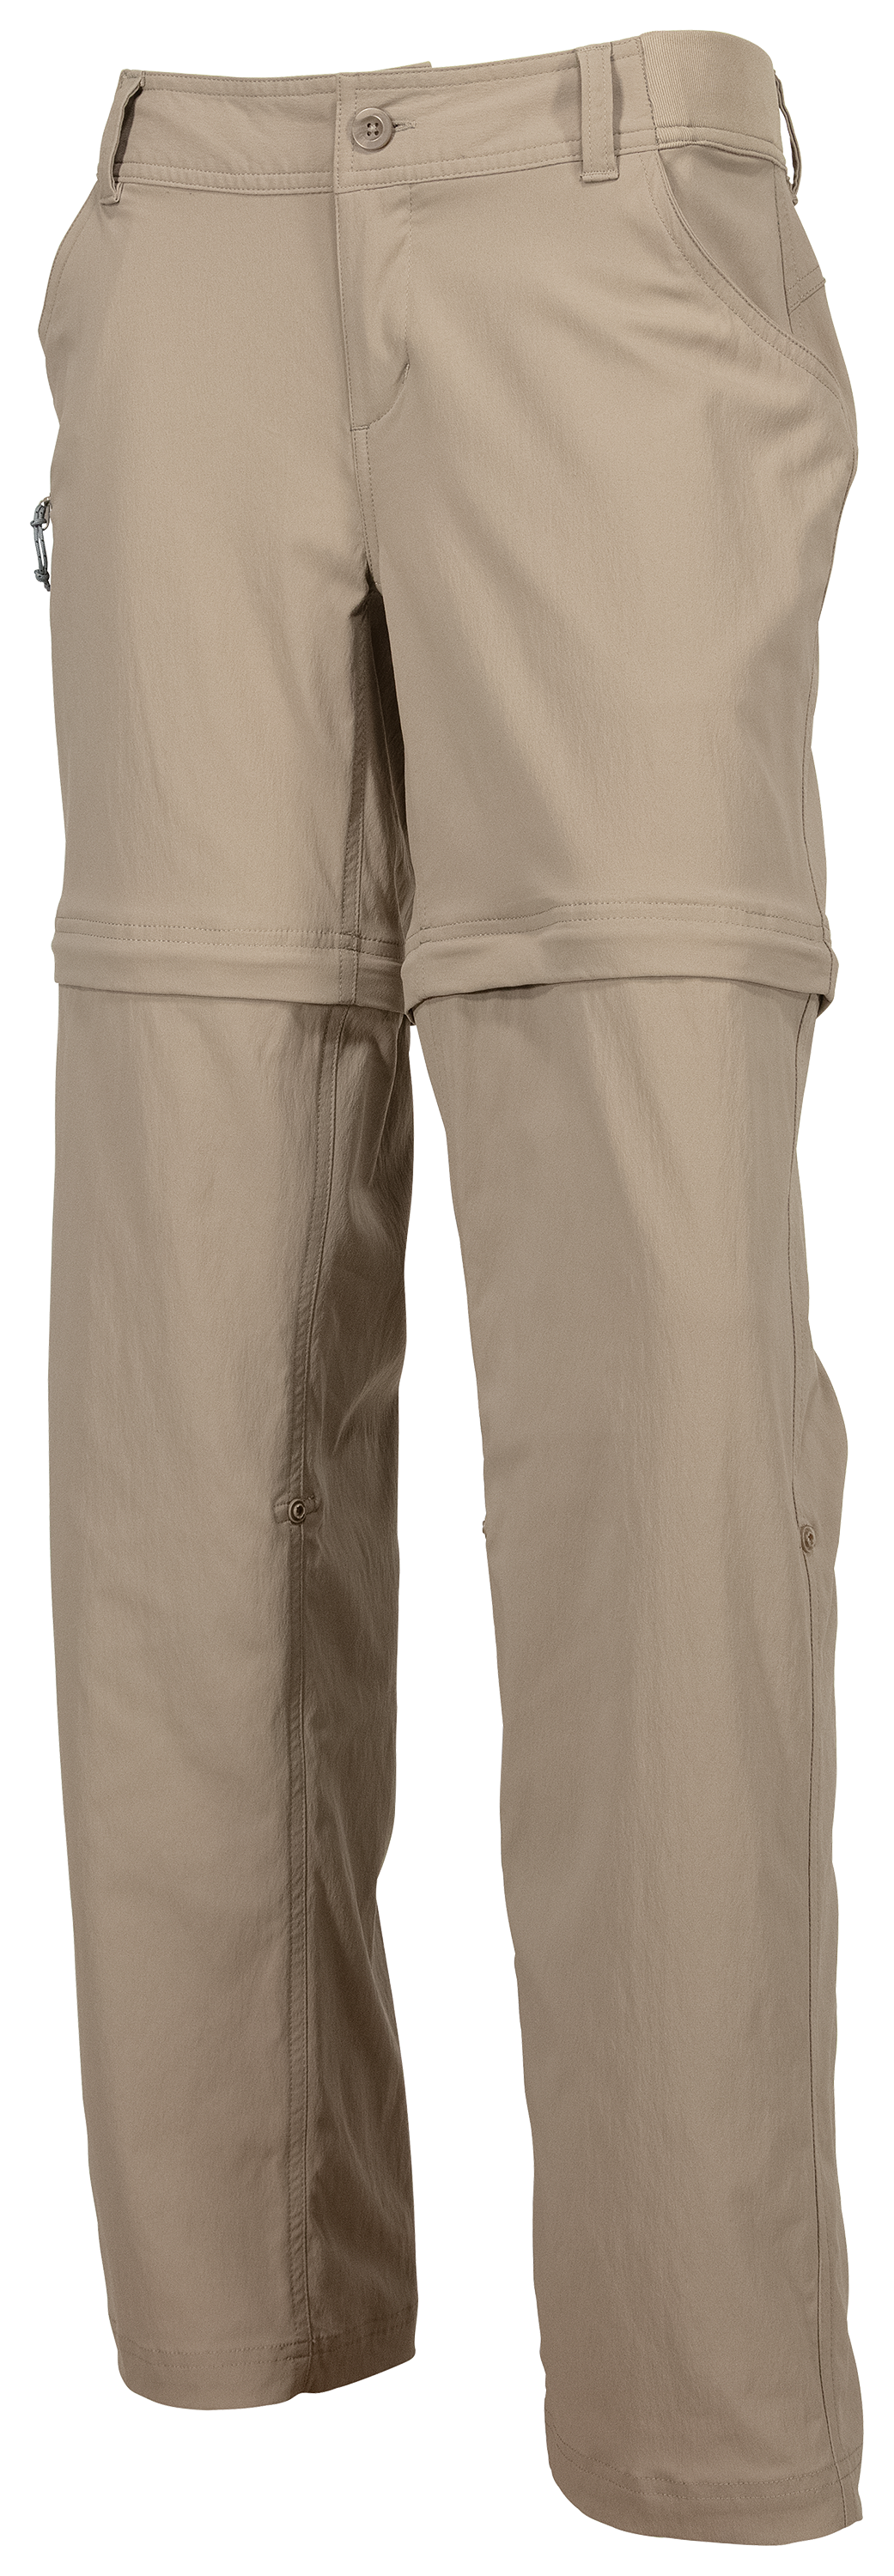 World Wide Sportsman Clearwater Convertible Pants for Ladies | Bass Pro ...